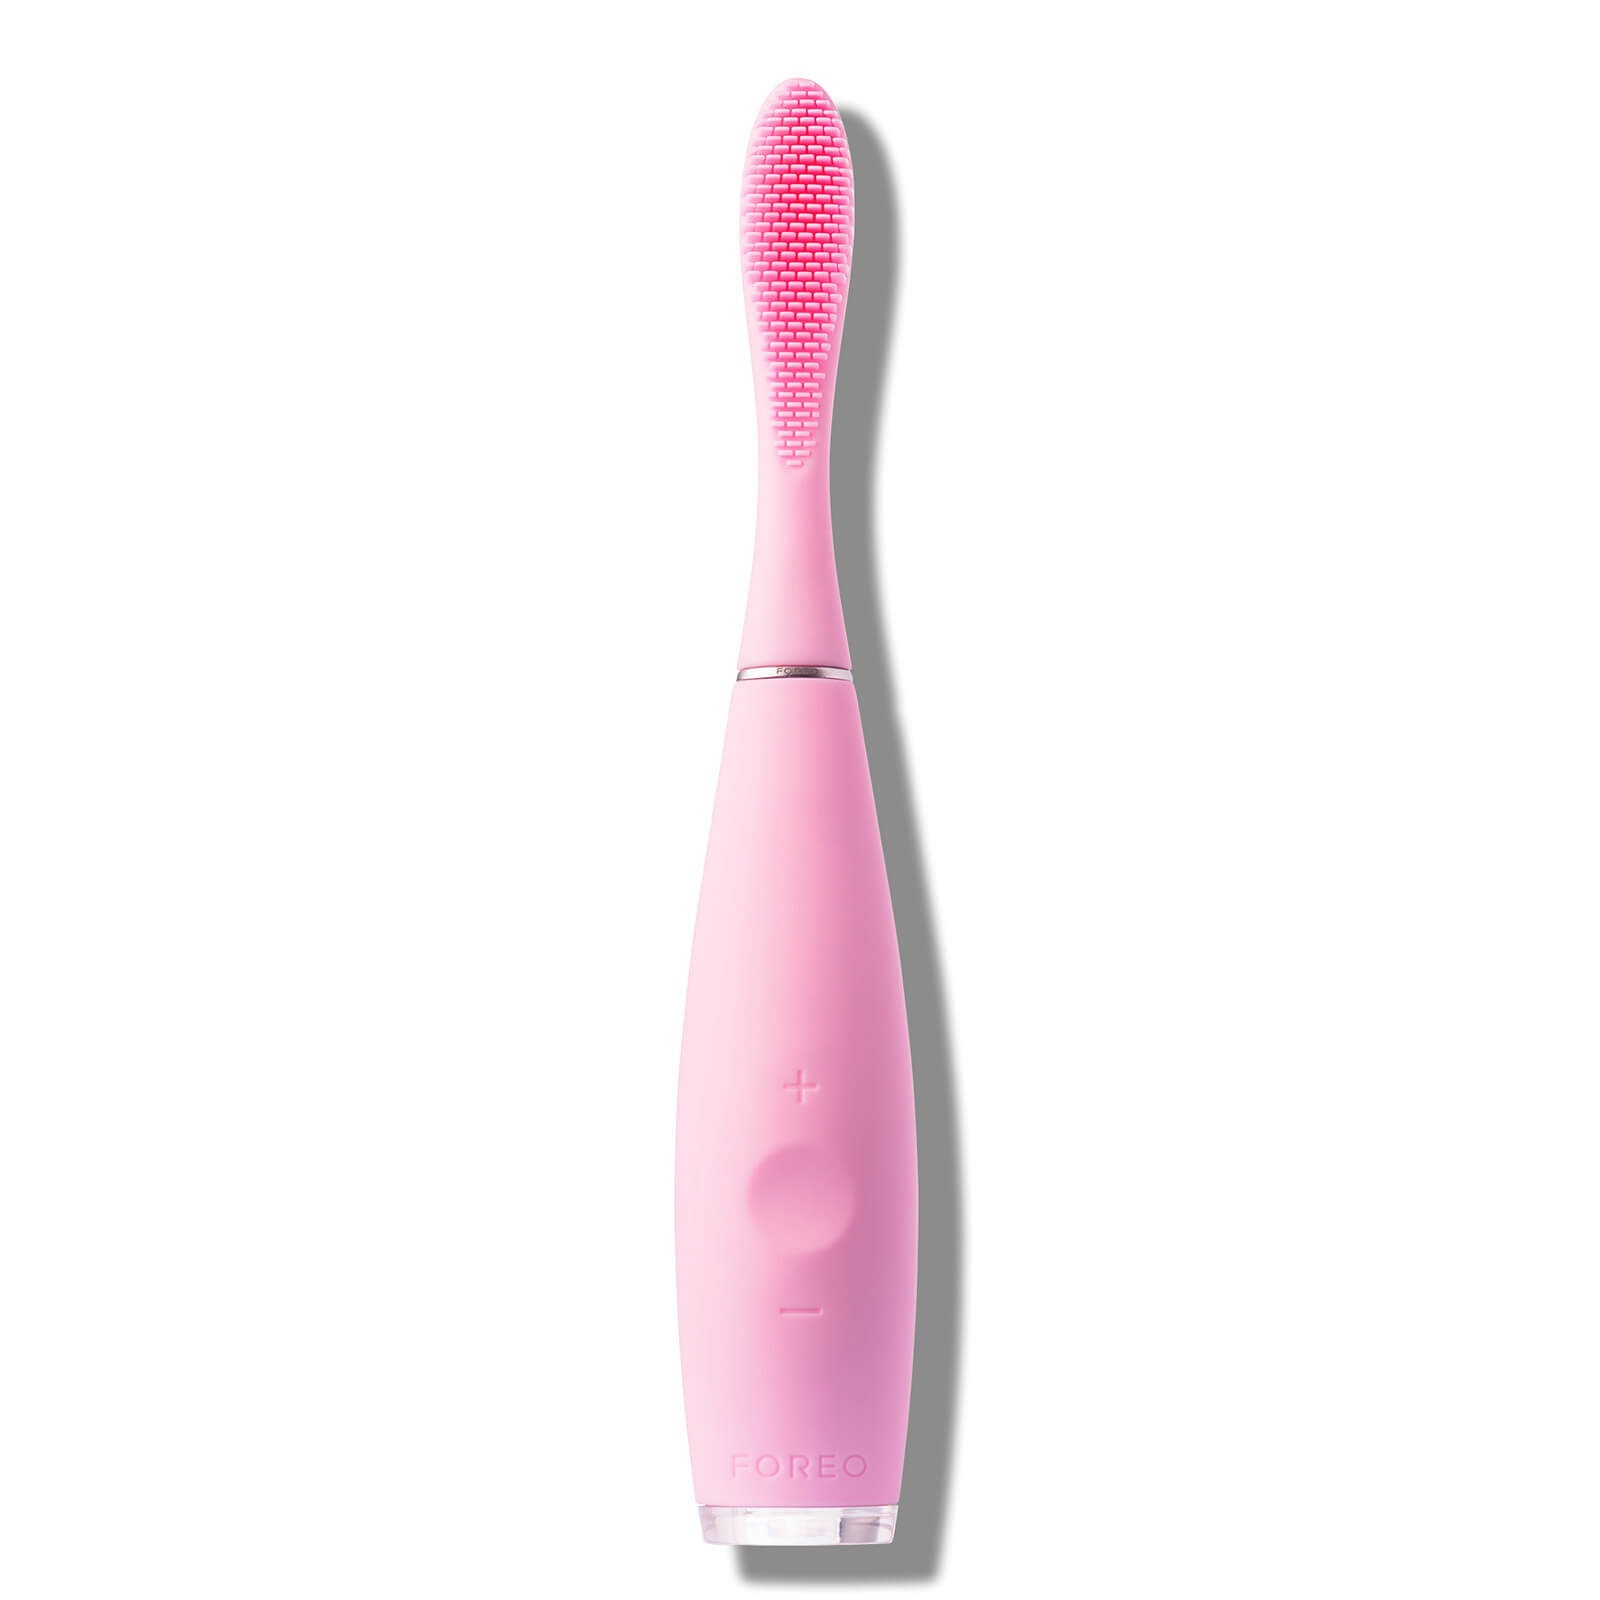 FOREO ISSA 2 Sensitive Electric Sonic Toothbrush Set (Various Shades) - Pearl Pink